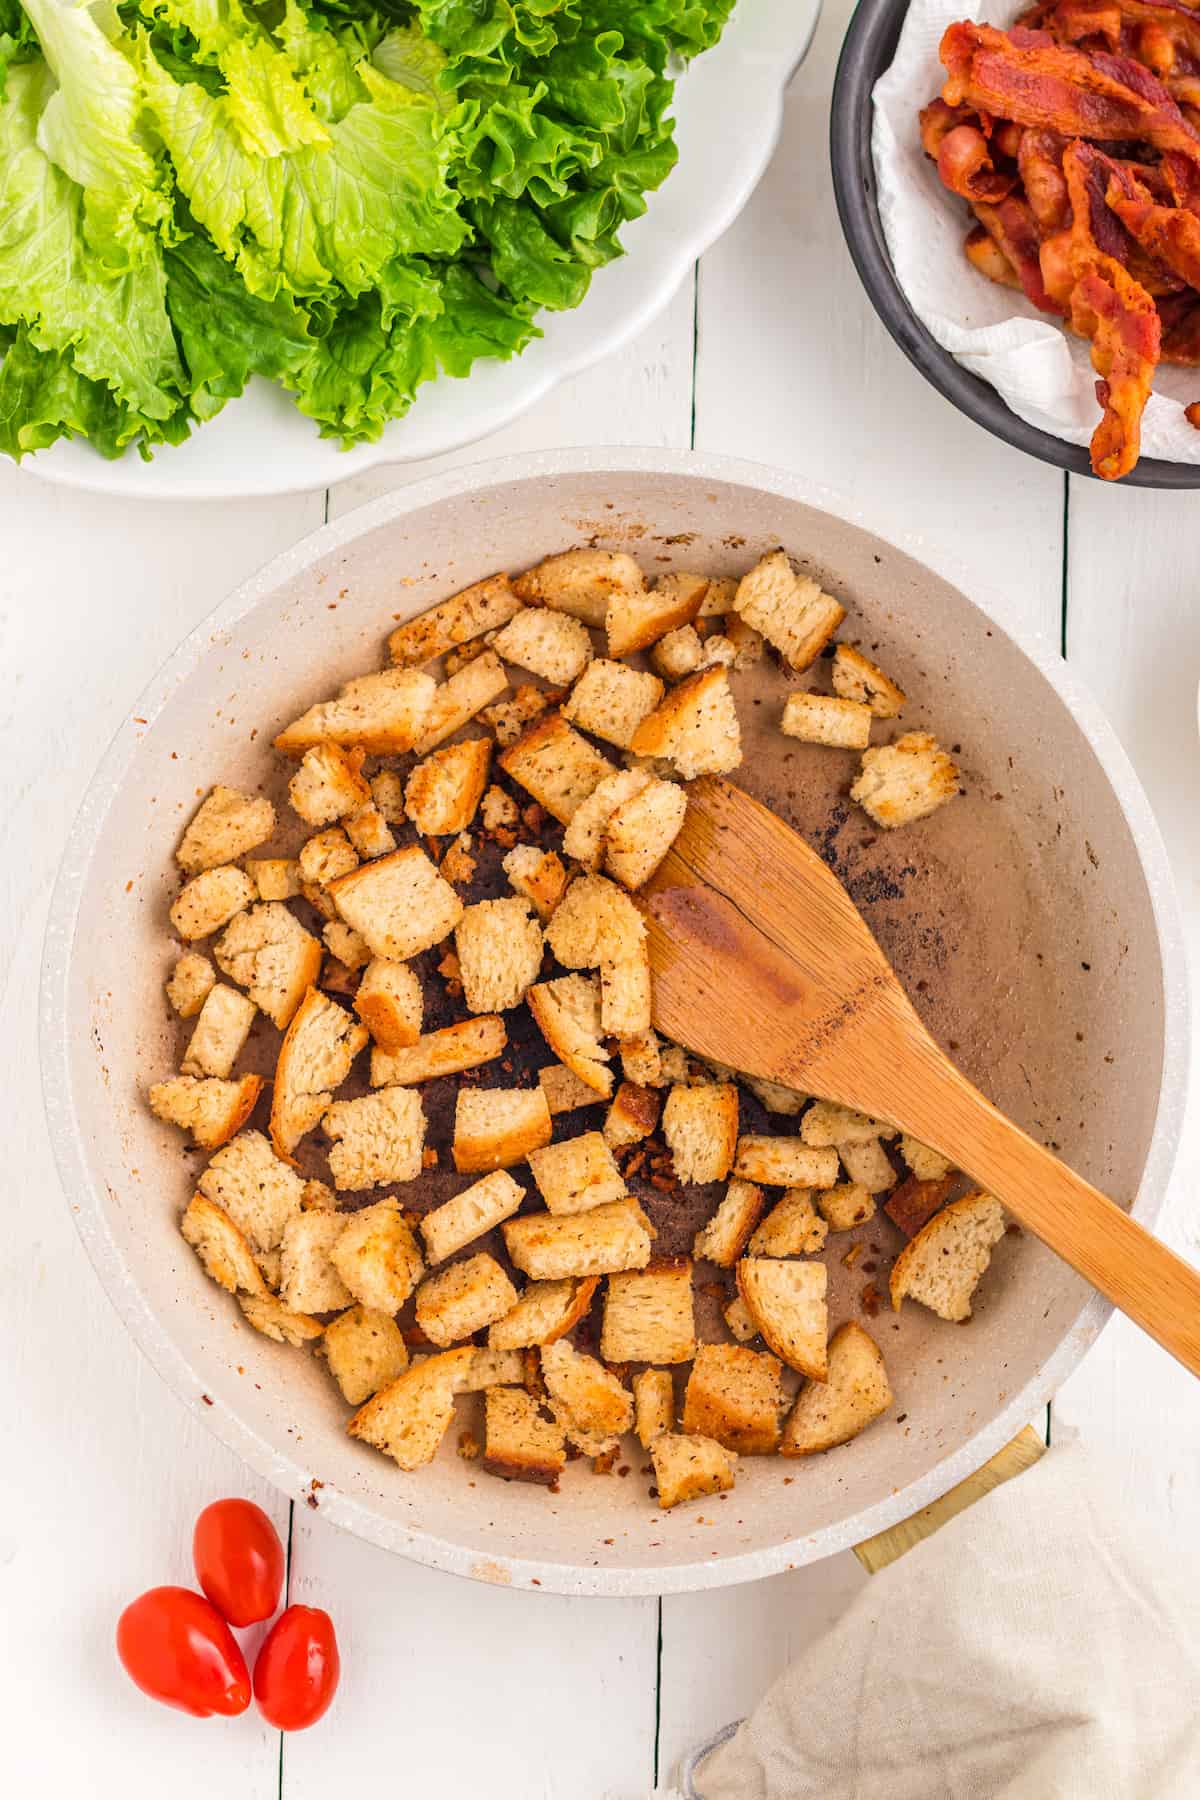 fry the croutons in a skillet